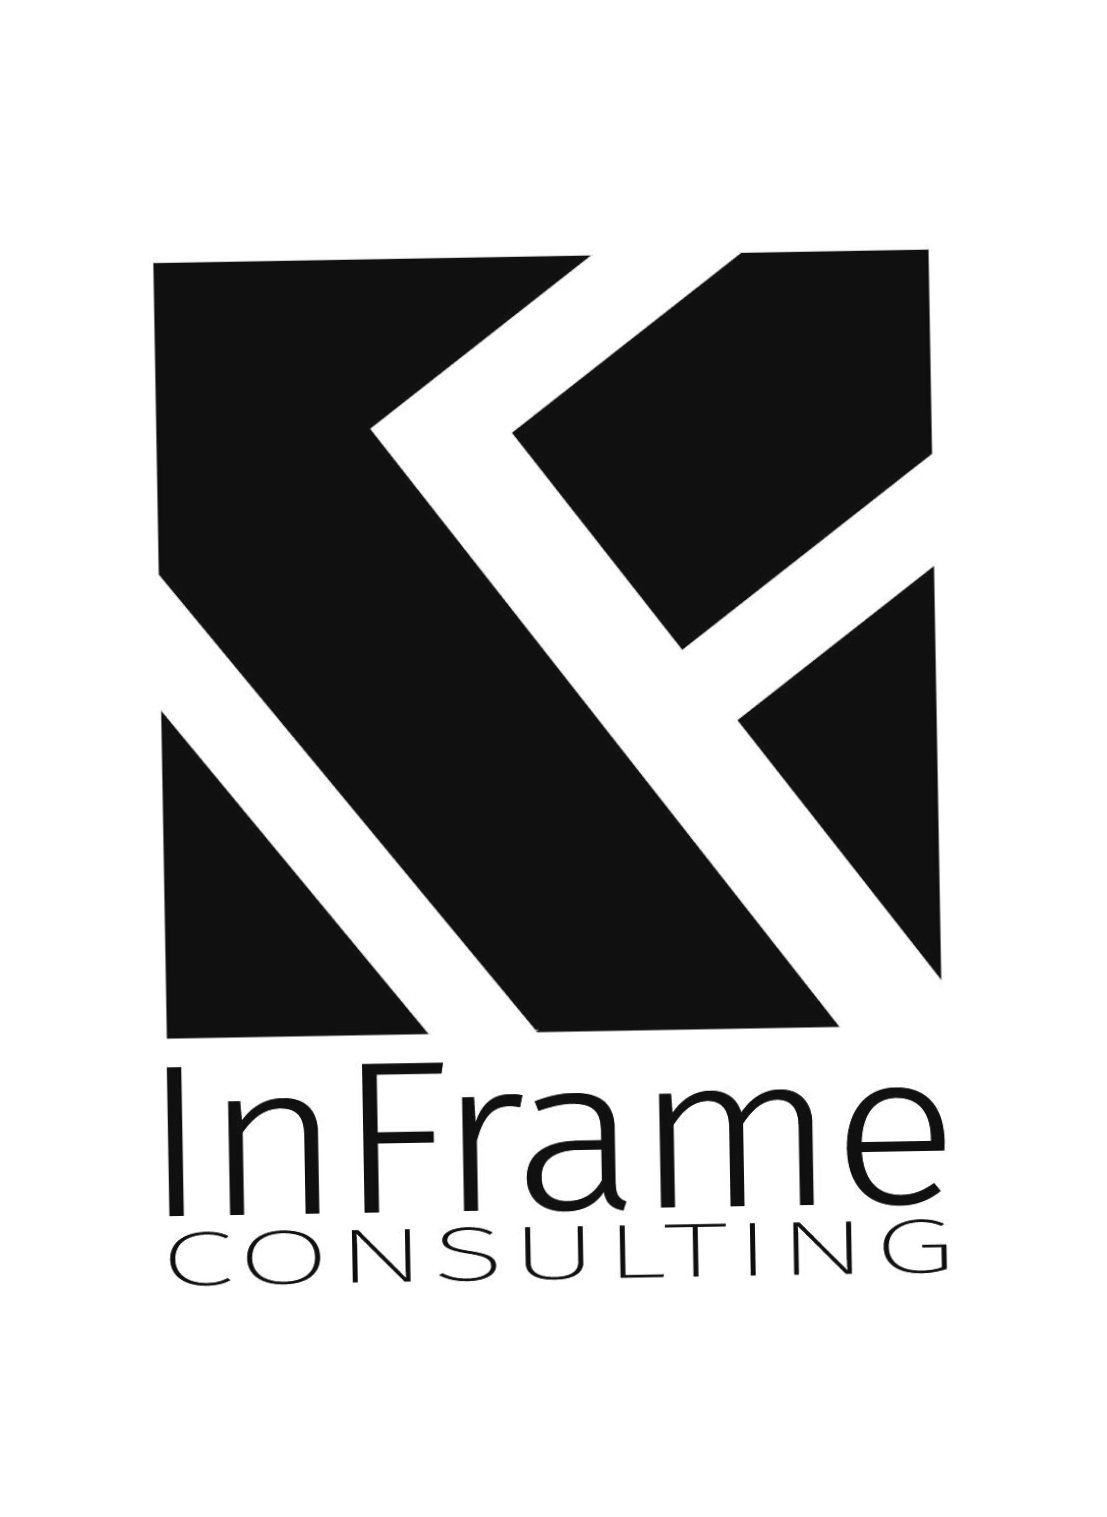 InFrame Consulting